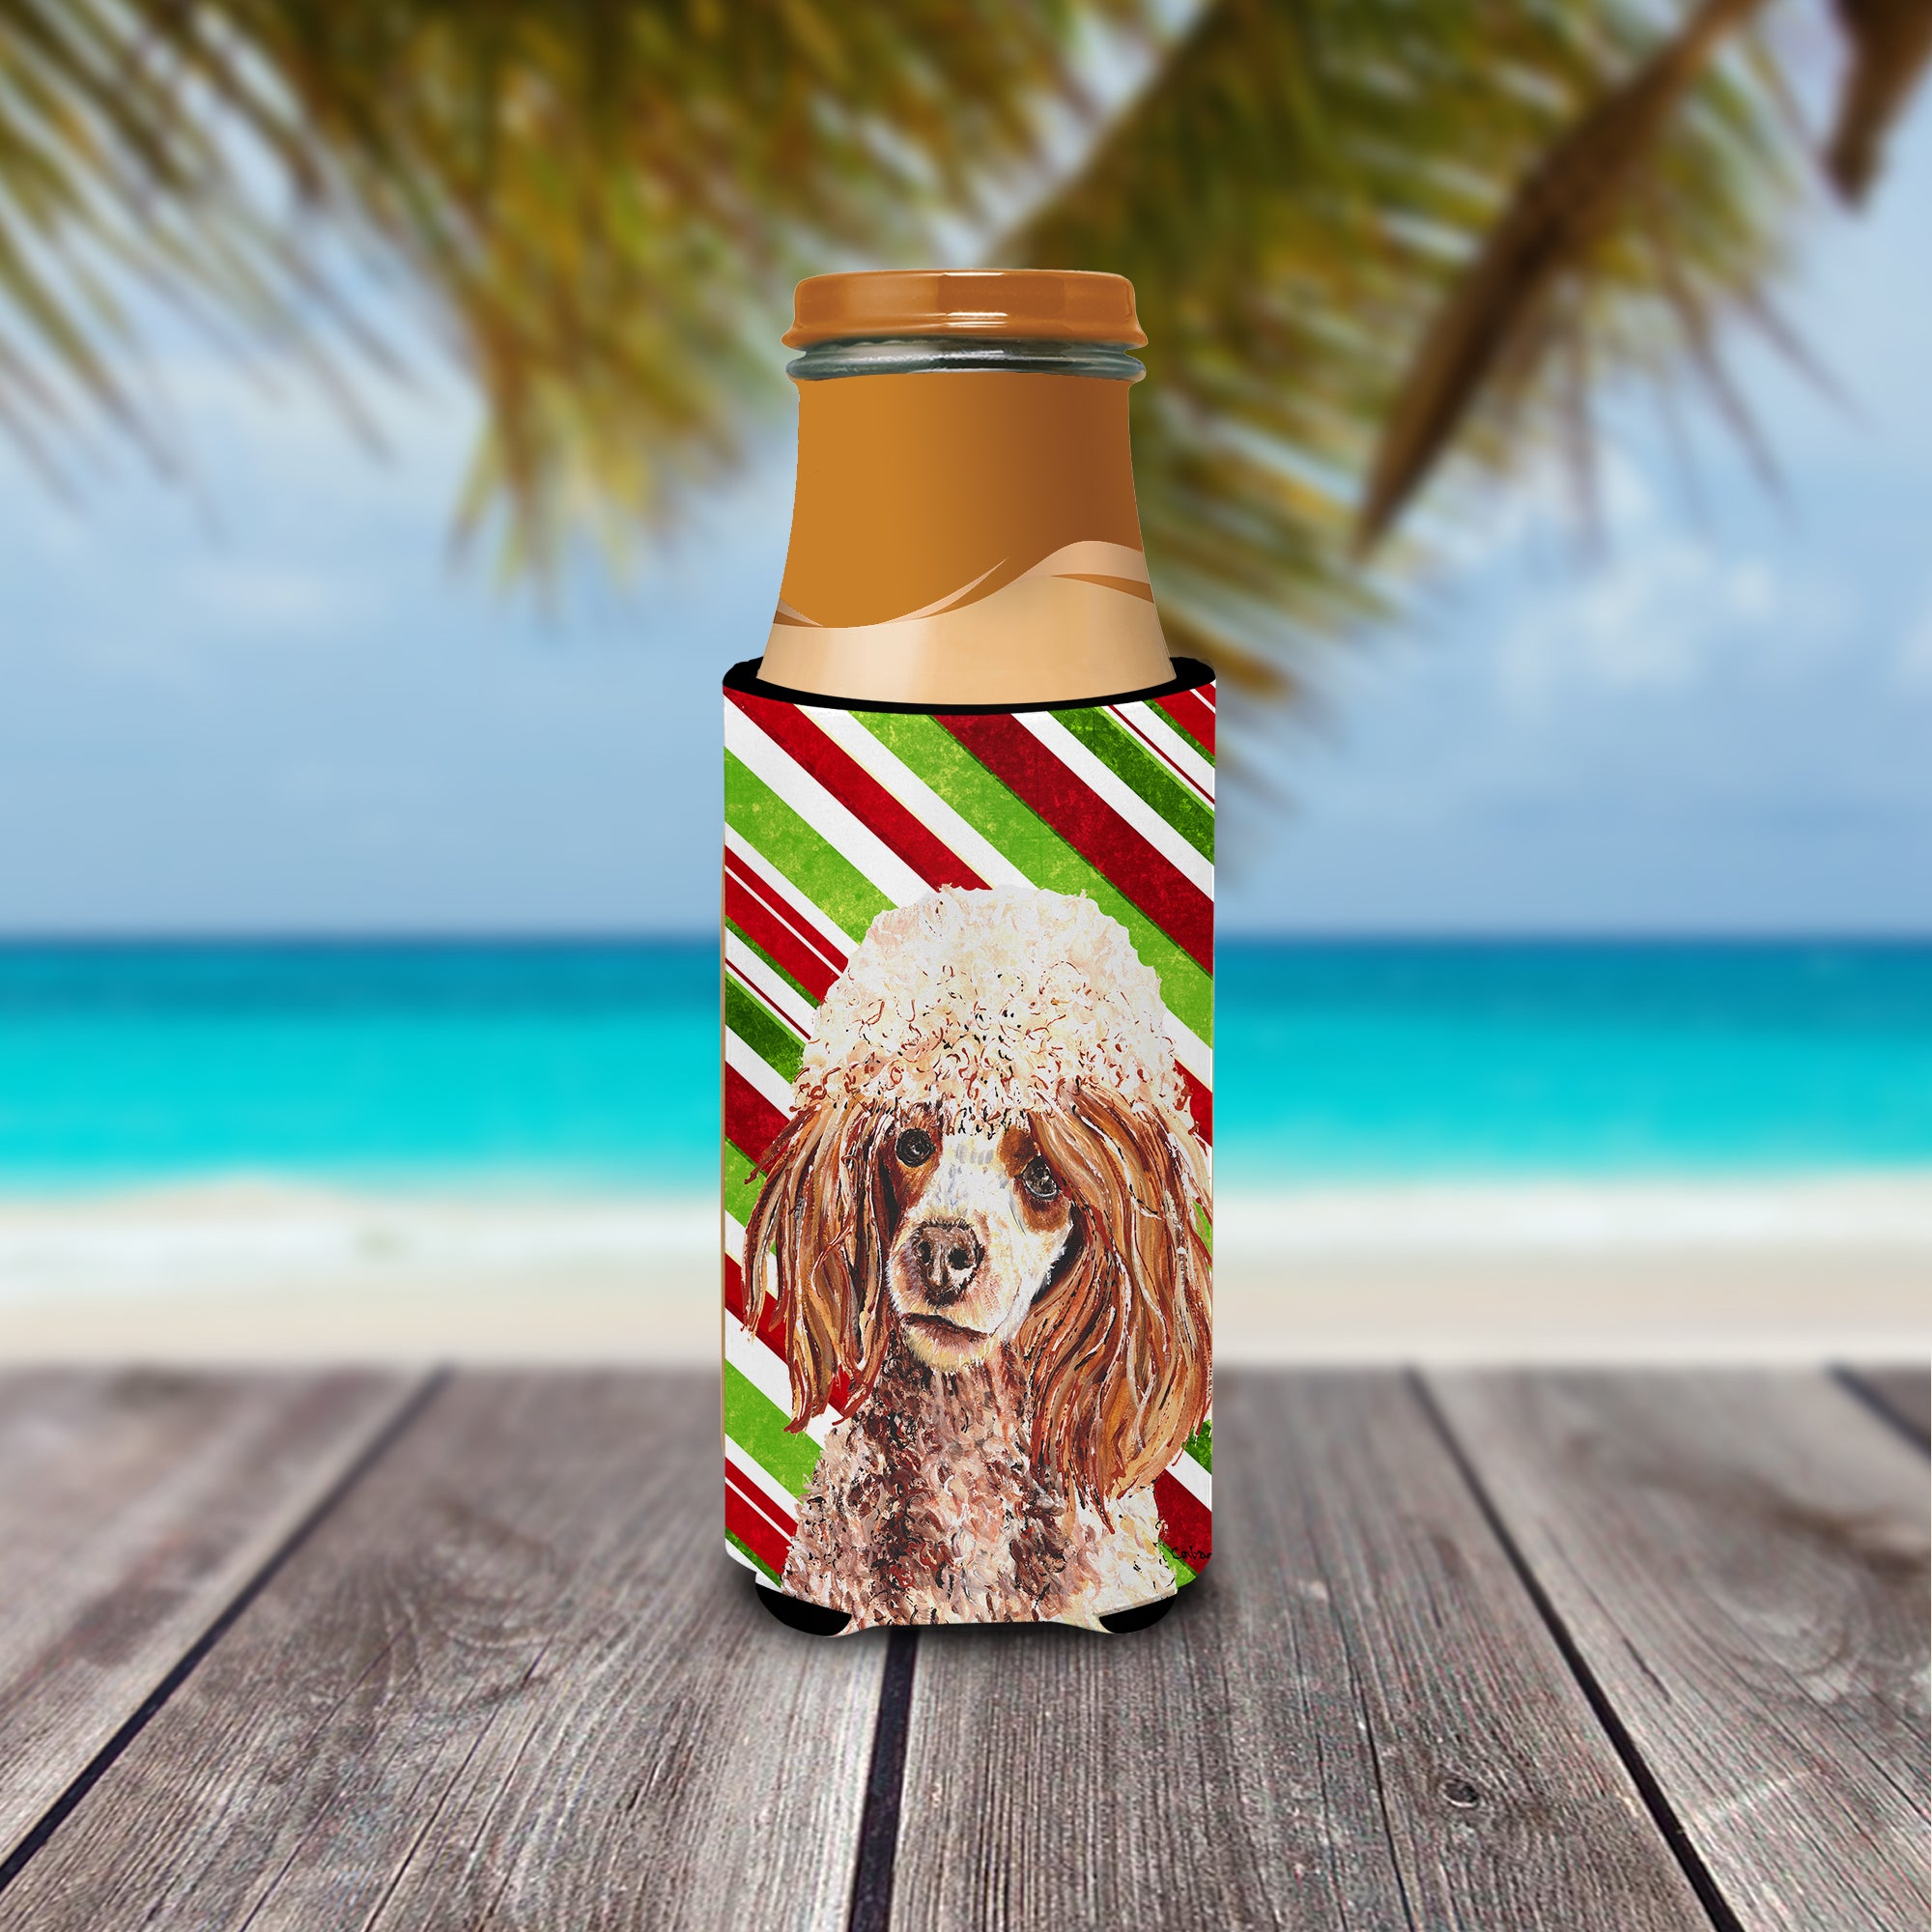 Red Miniature Poodle Candy Cane Christmas Ultra Beverage Insulators for slim cans SC9795MUK.